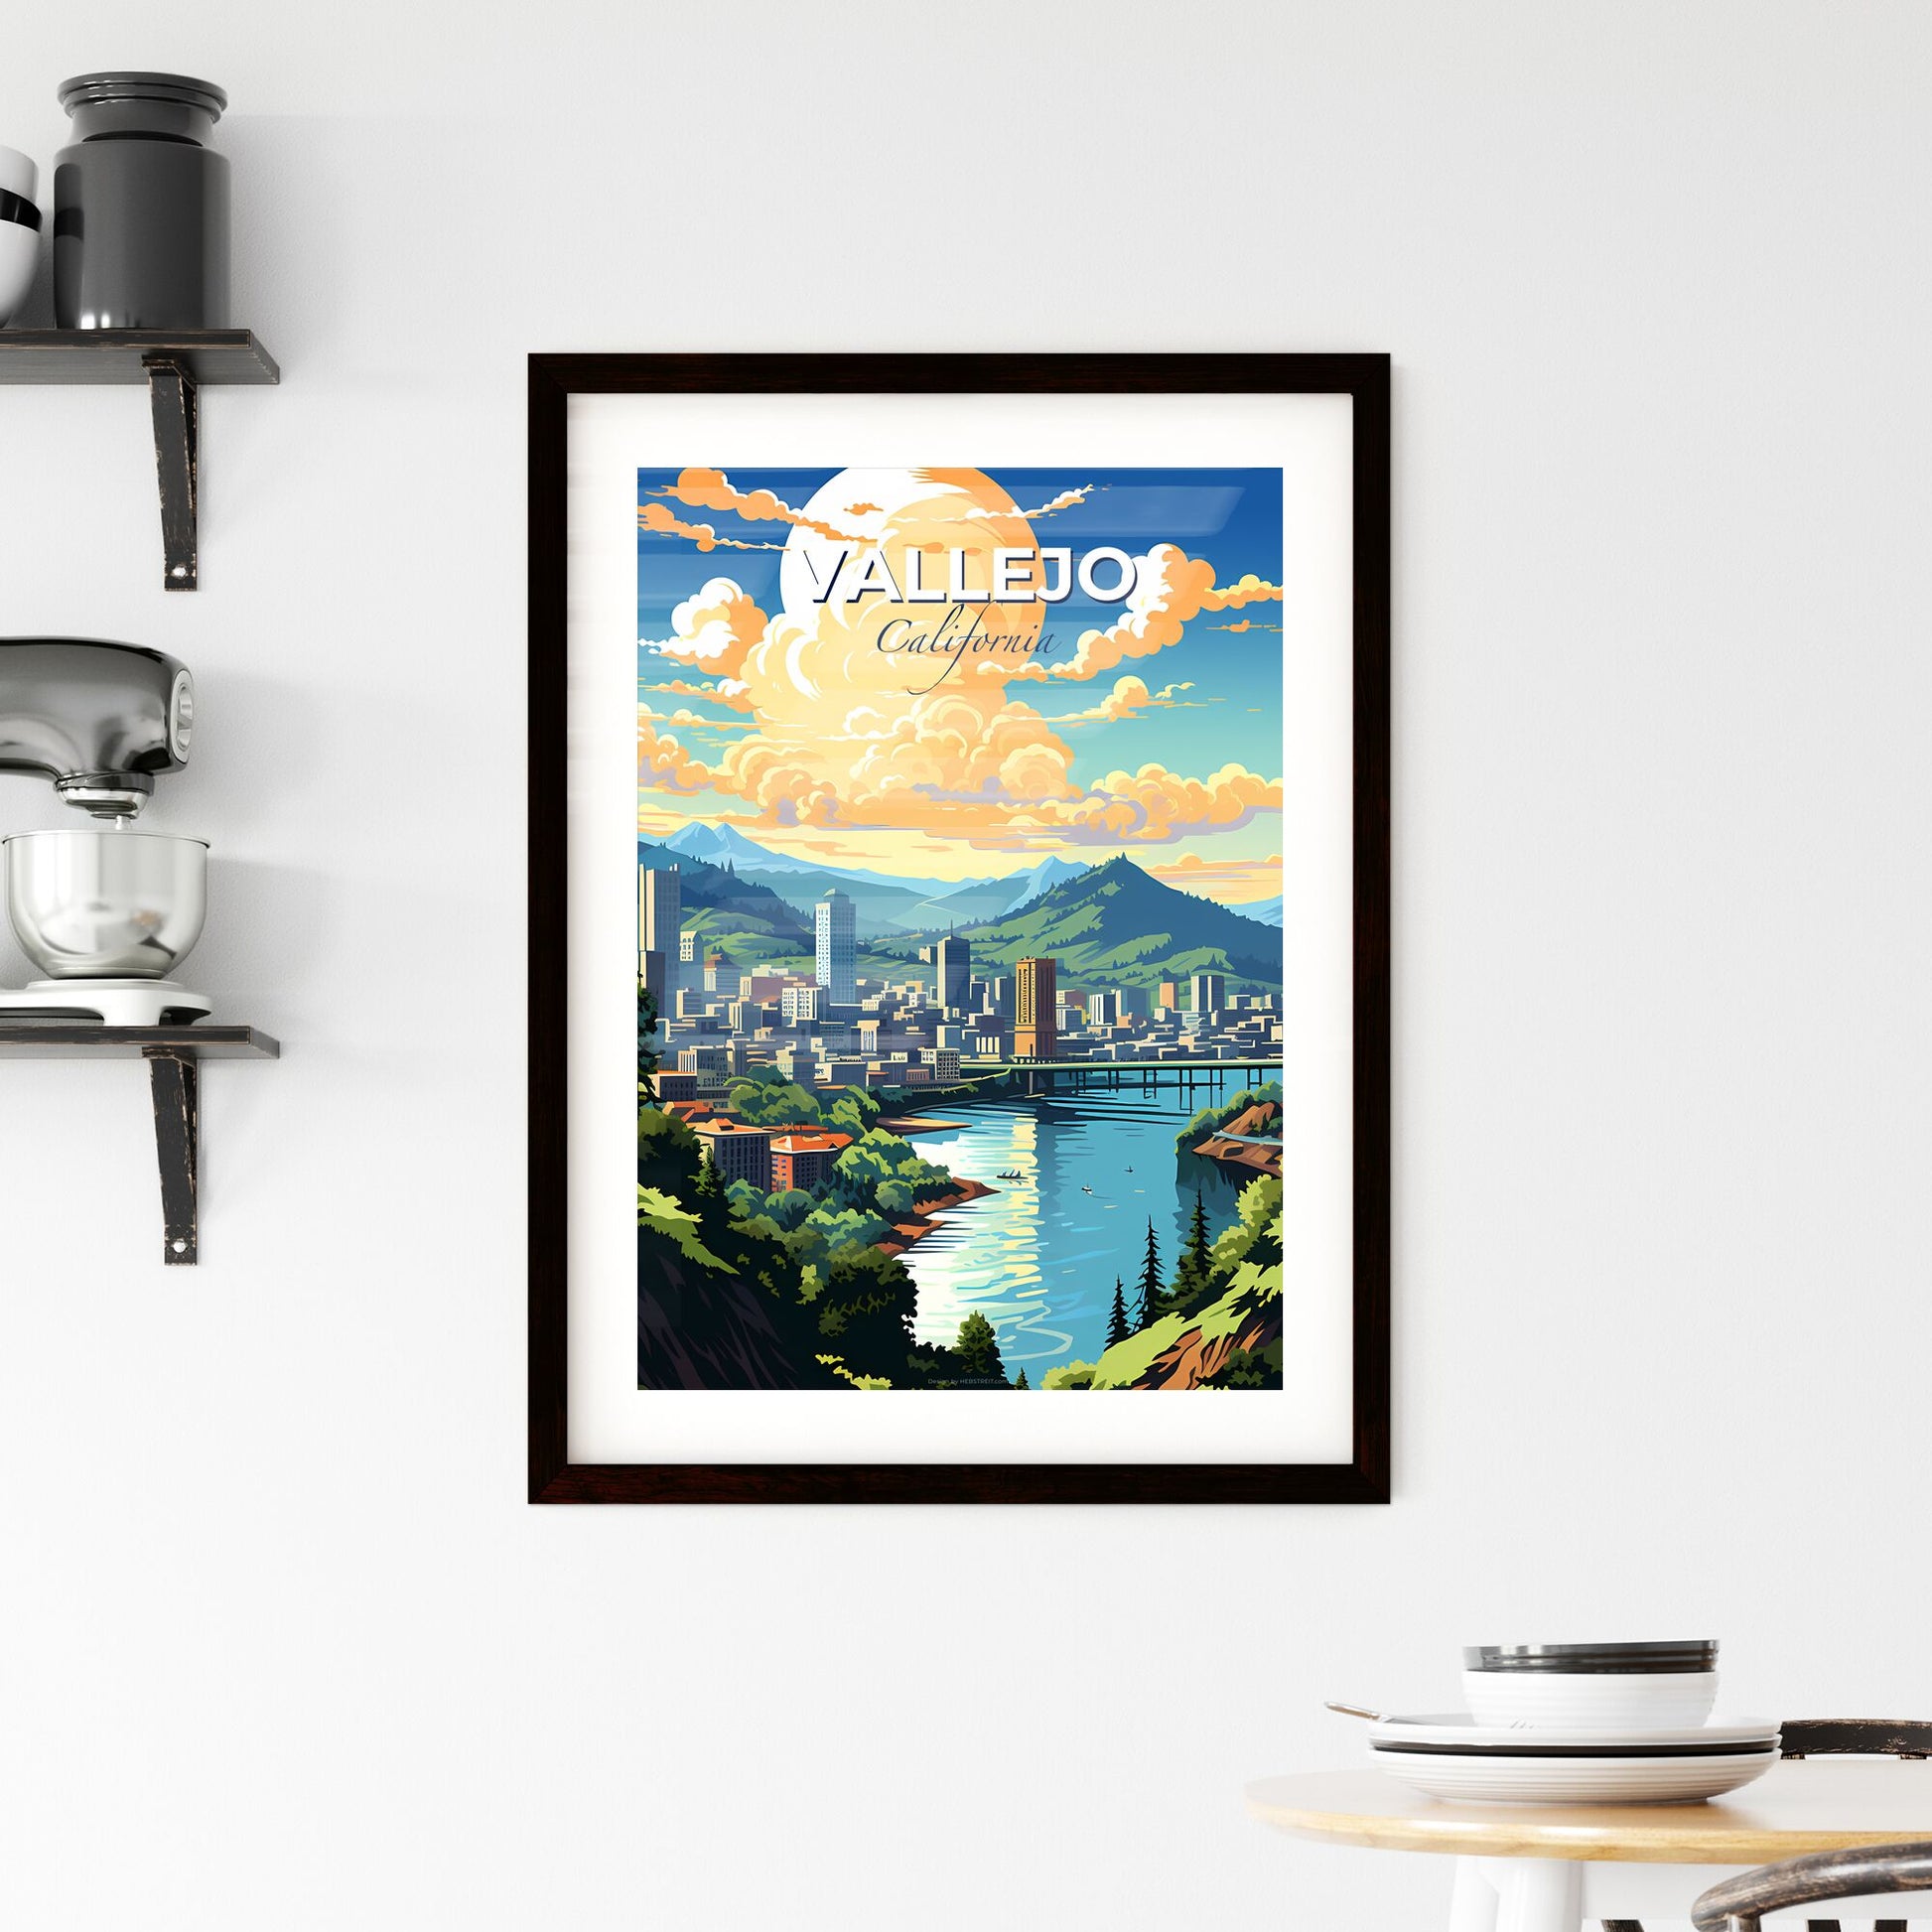 Vallejo, California, A Poster of a city by a river Default Title